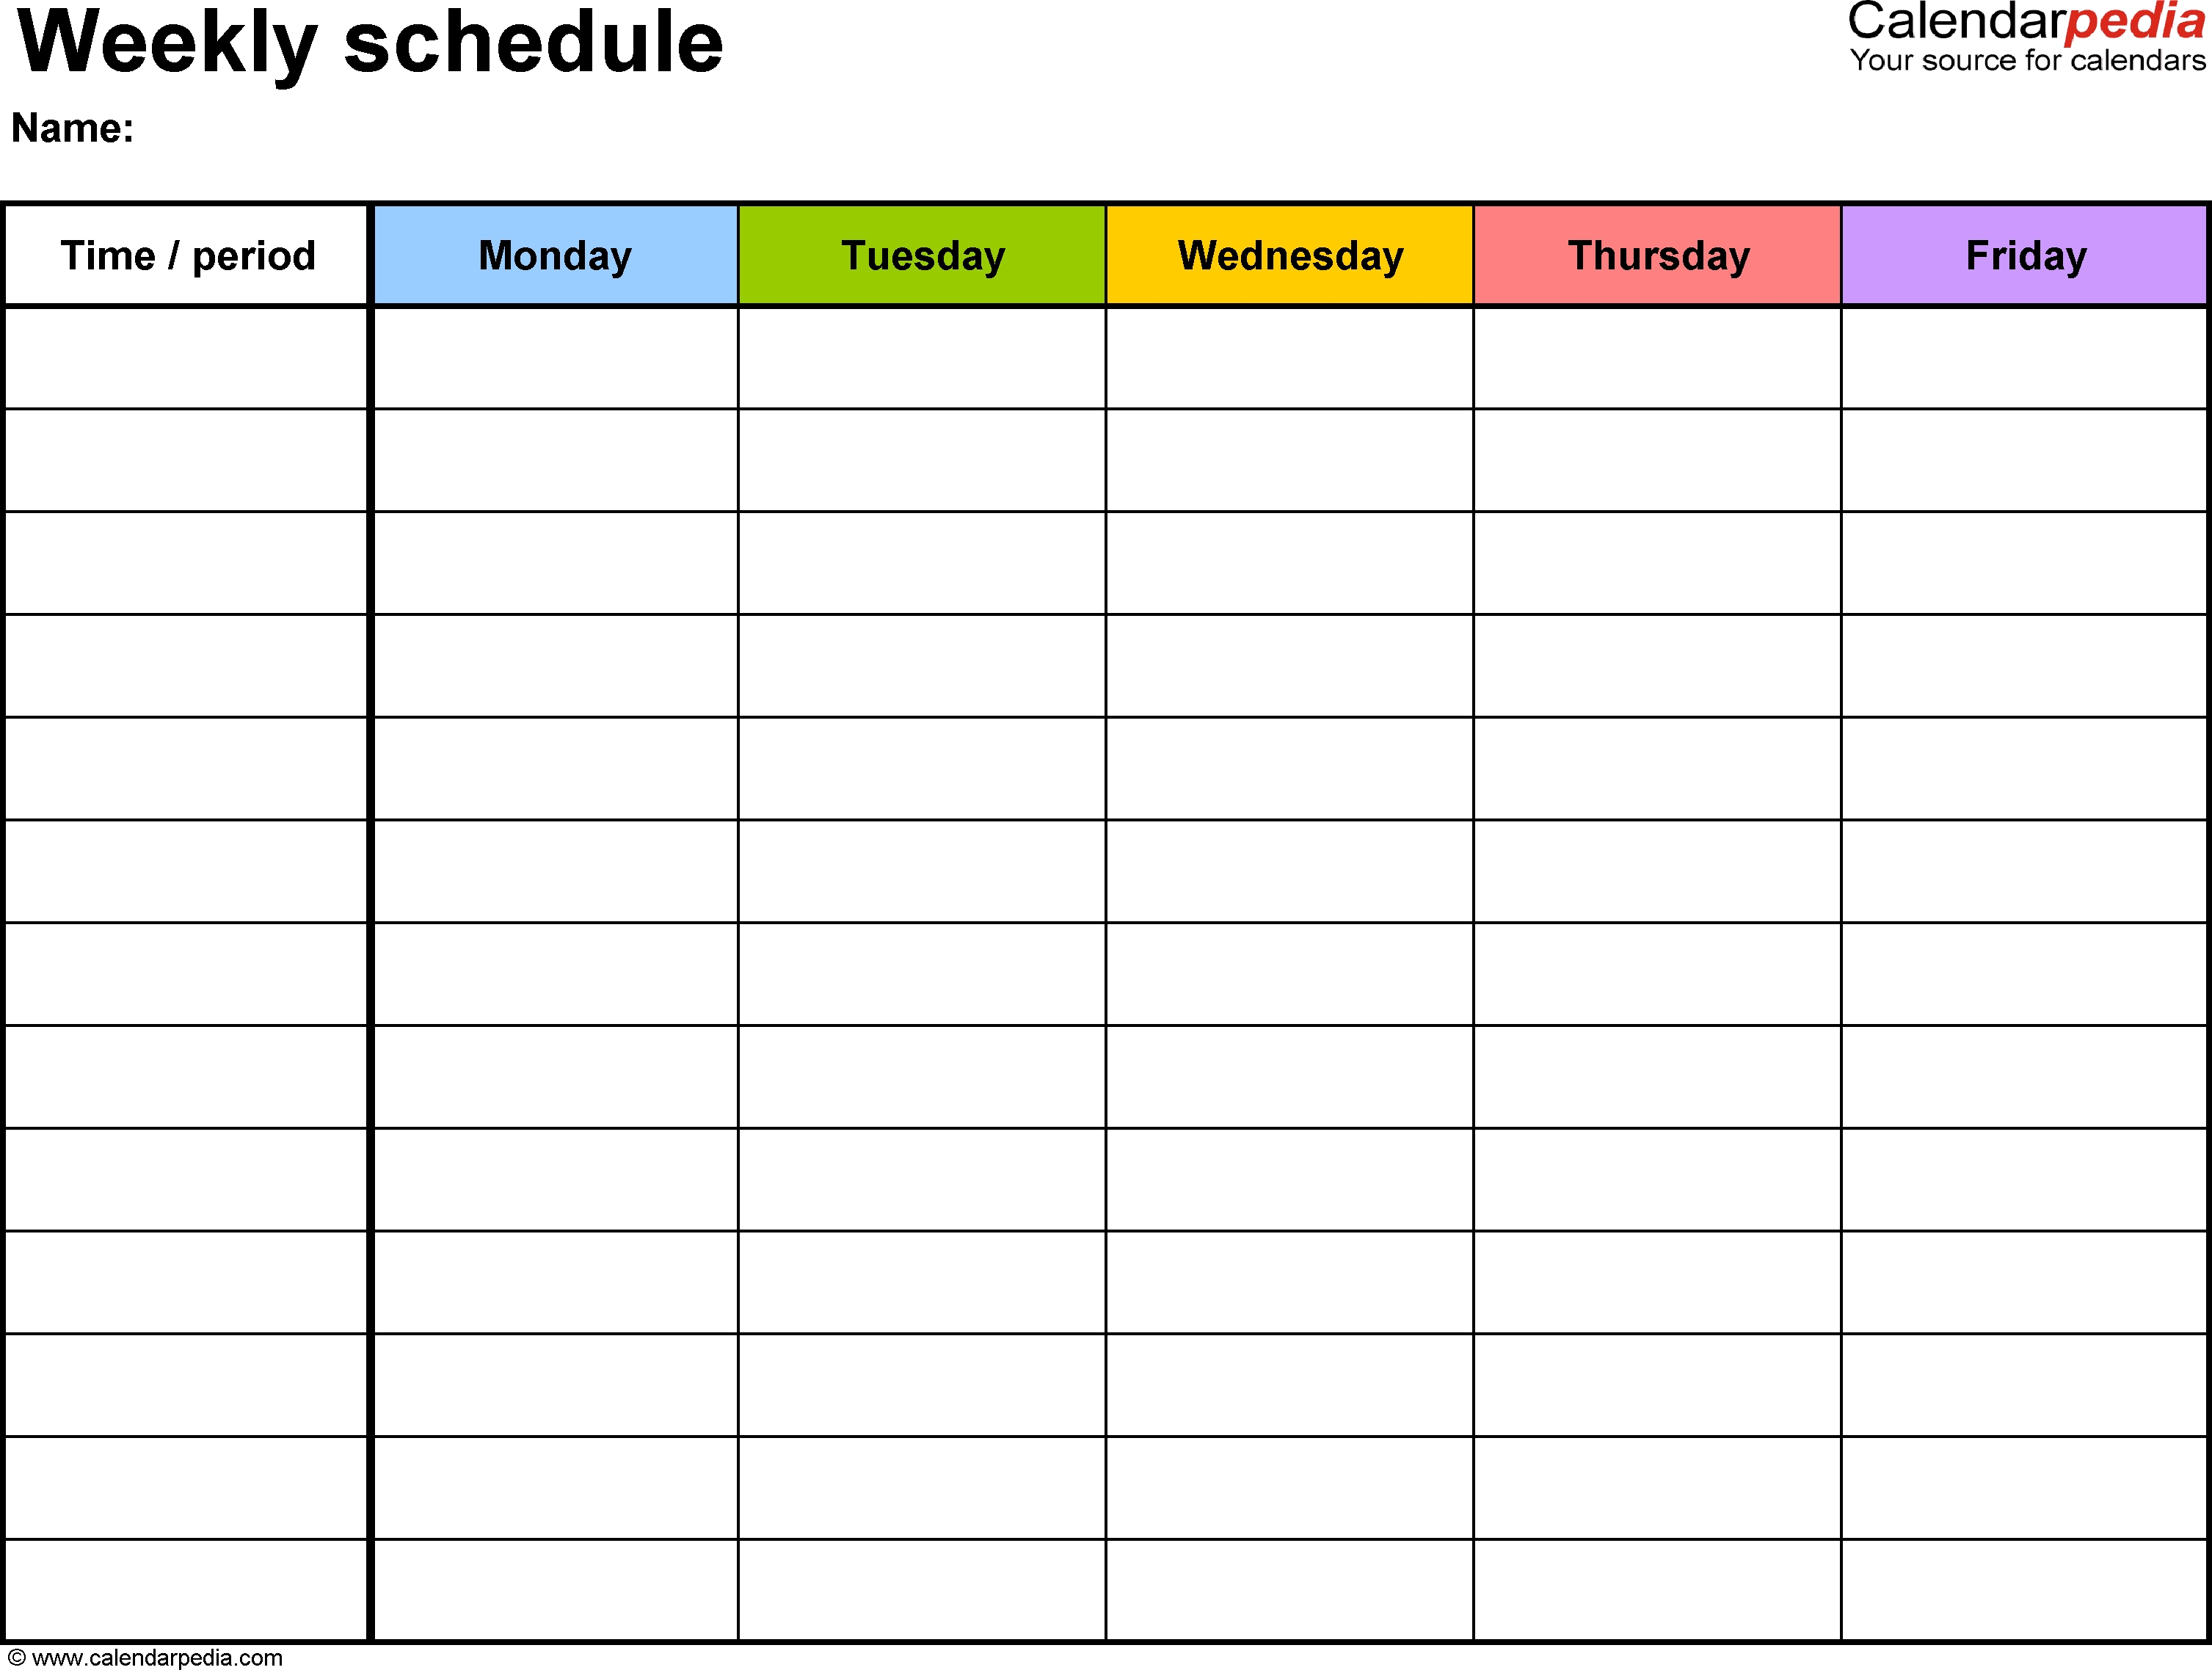 Free Weekly Schedule Templates For Word - 18 Templates regarding Monday Through Friday Activity Schedule